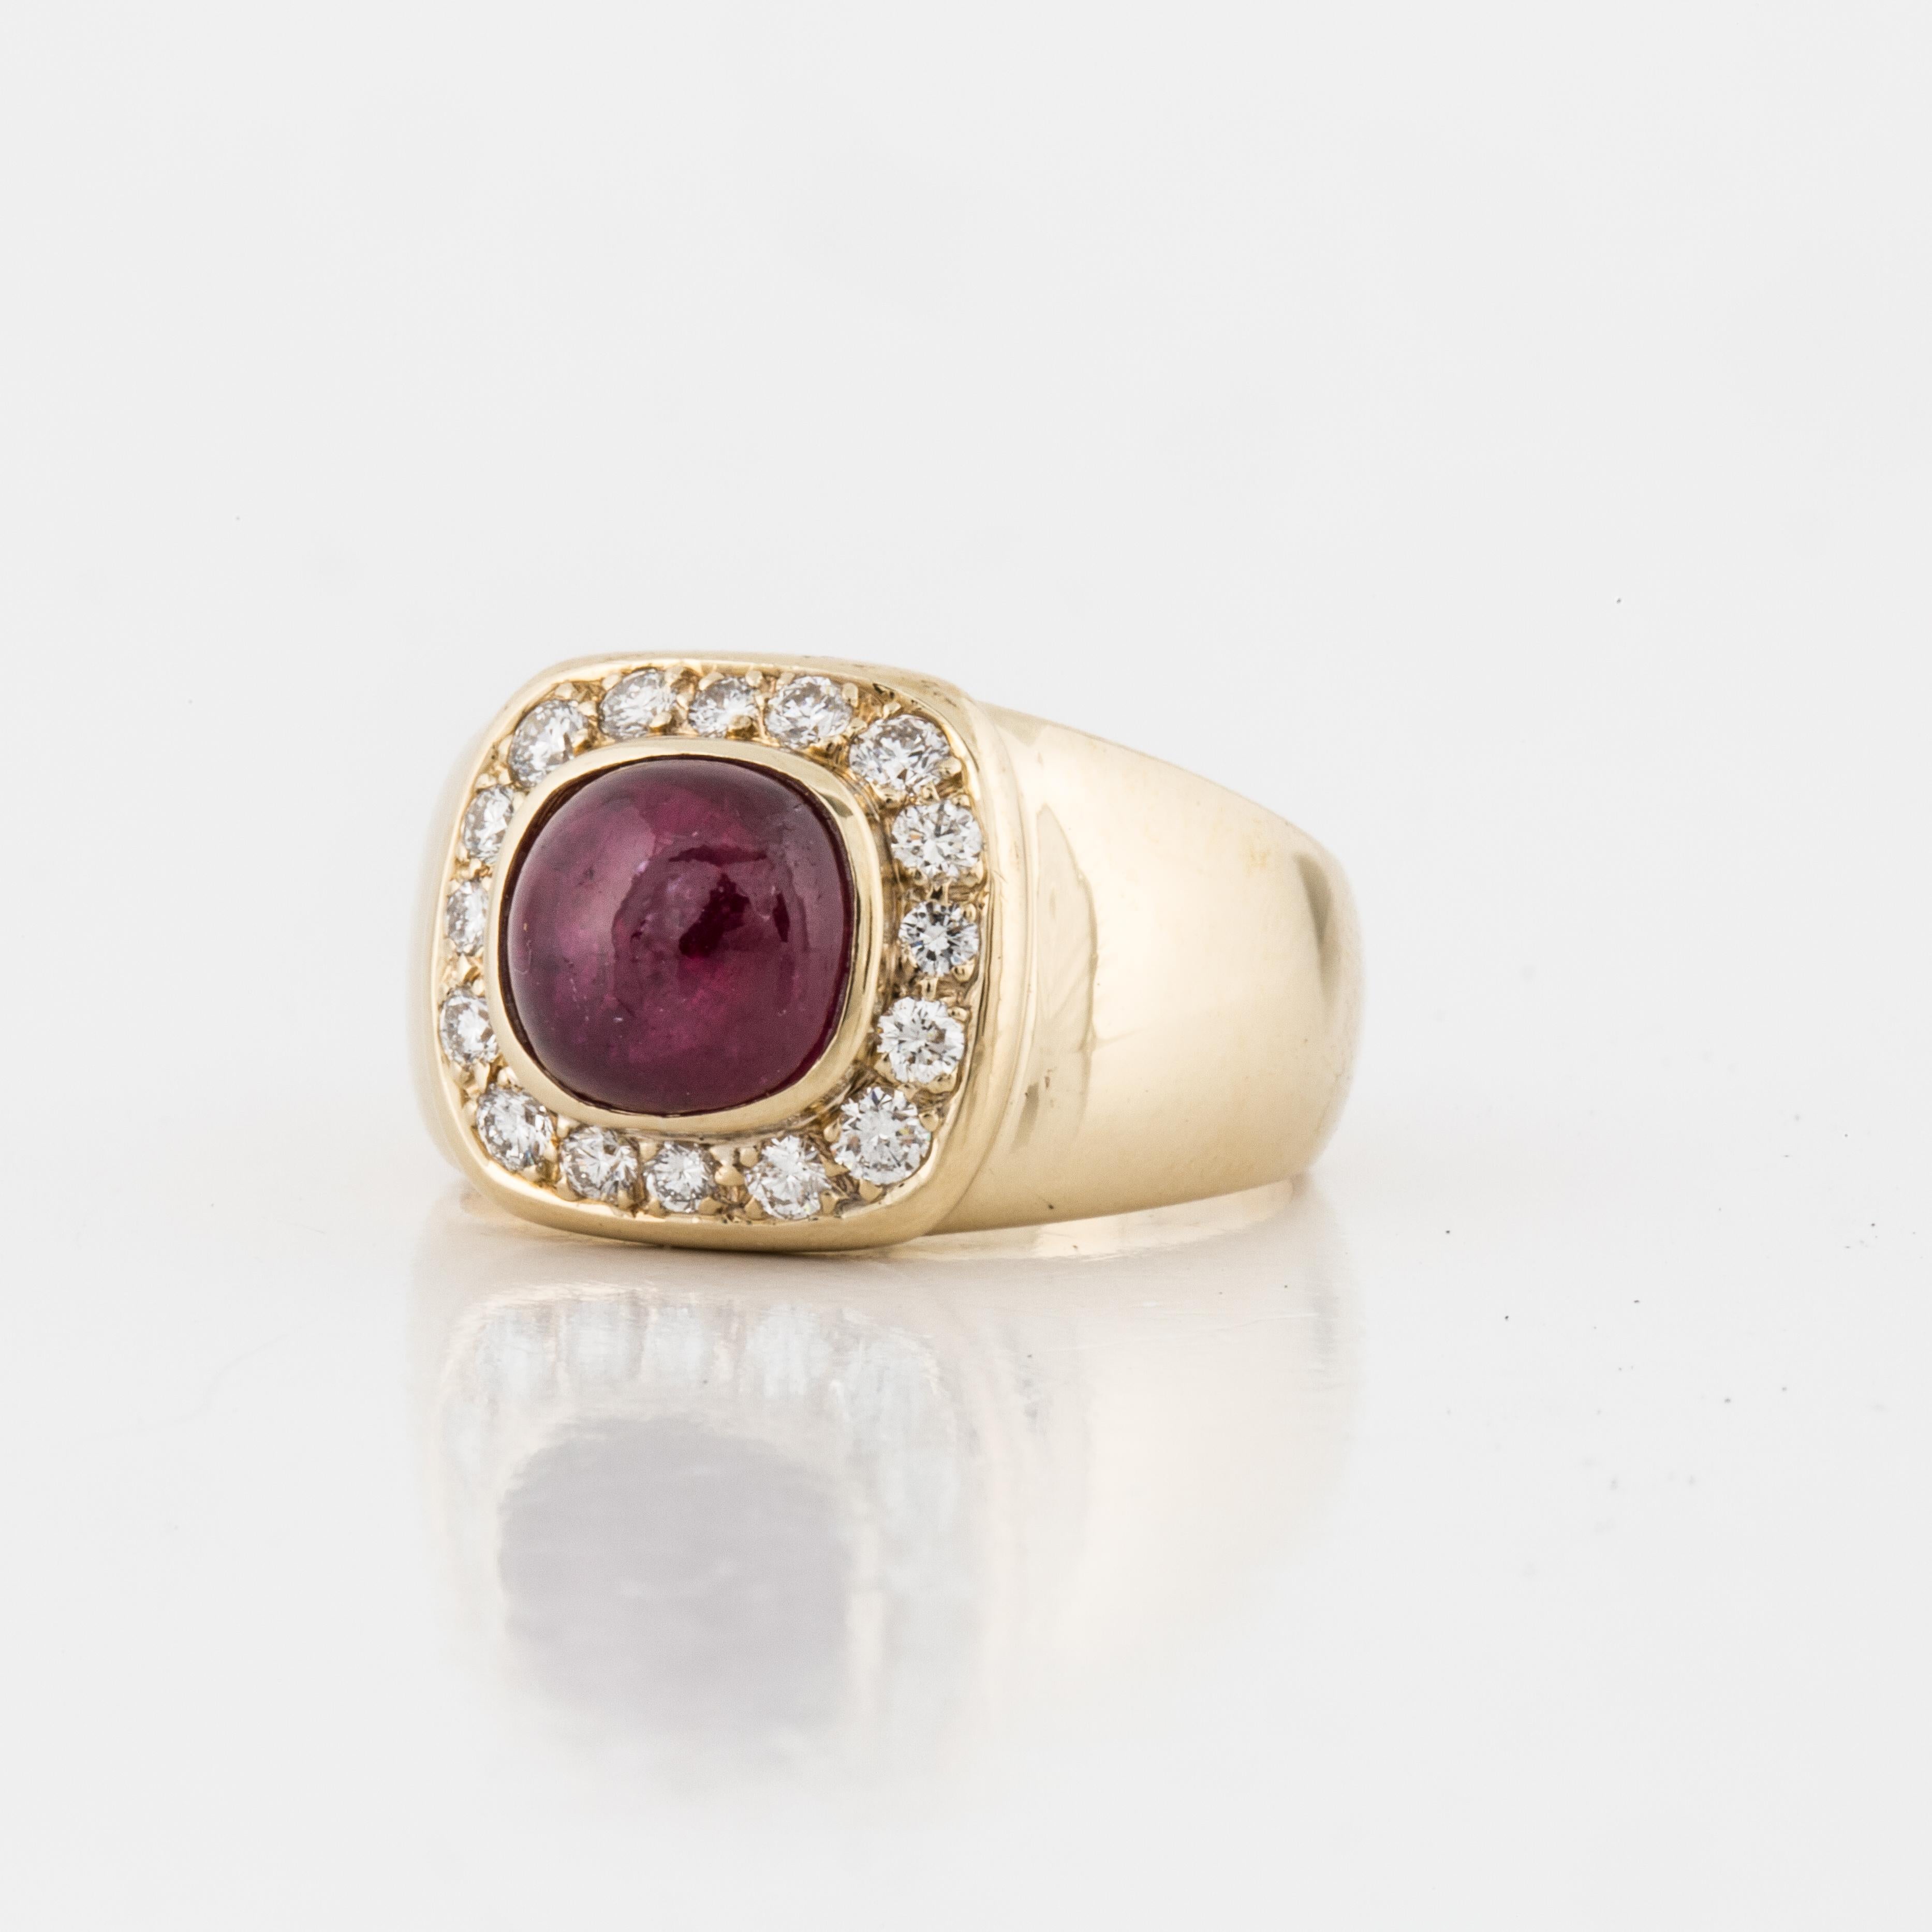 14K yellow gold ring featuring a cabochon ruby surrounded by diamonds.  There are sixteen round diamonds totaling 0.45 carats; G-H color and VS1-2 clarity.  The ring is currently a size 5 1/2.  The presentation area measures 1/2 inch by 7/16 of an